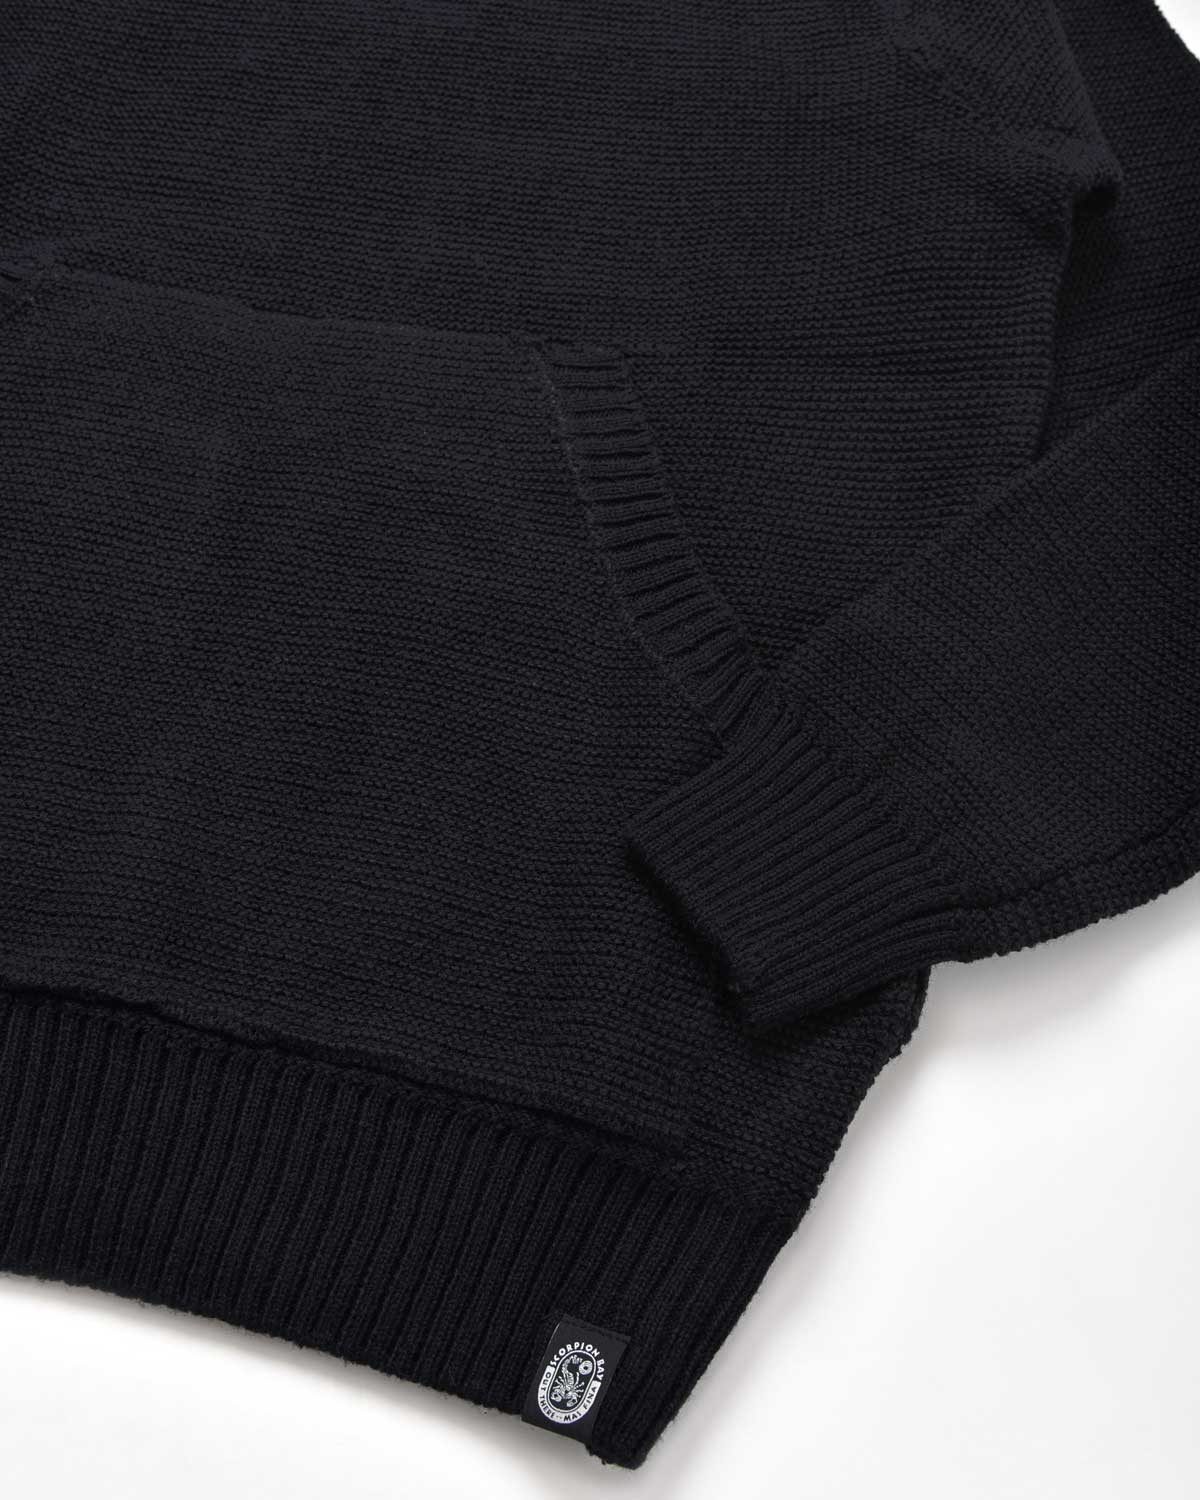 Man | Black knitted sweater with hood